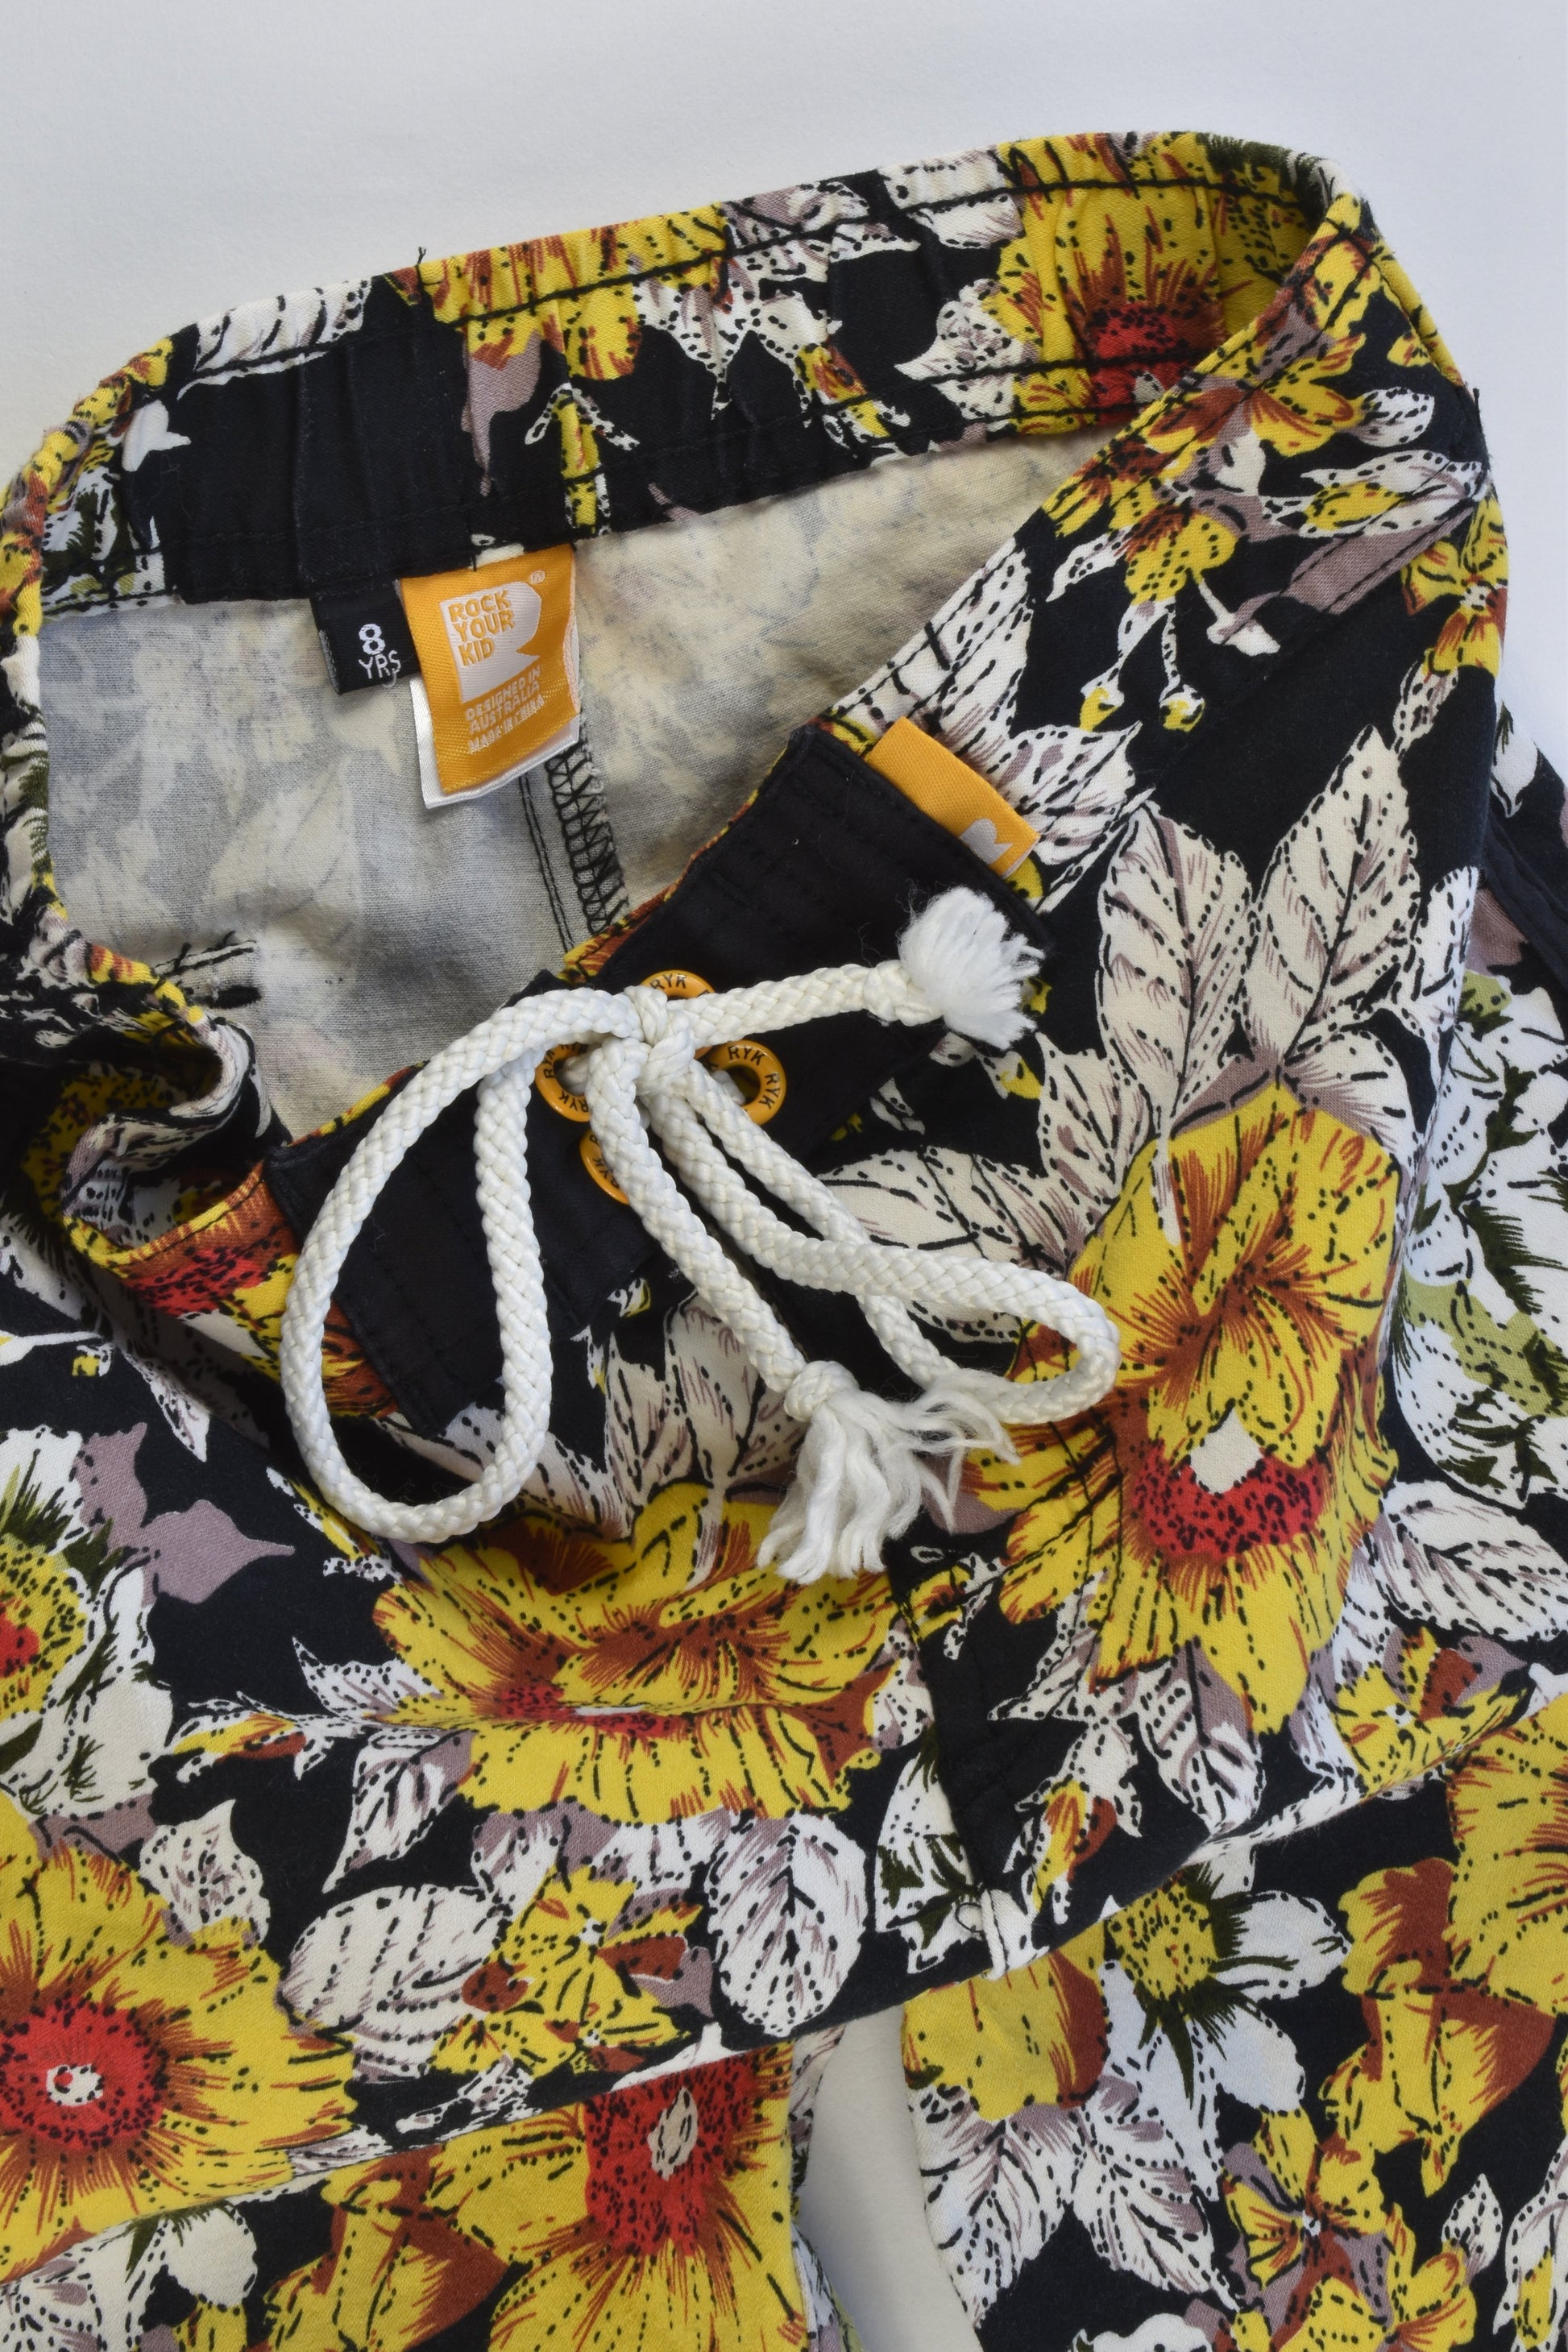 Rock Your Kid Size 8 Floral Board Shorts